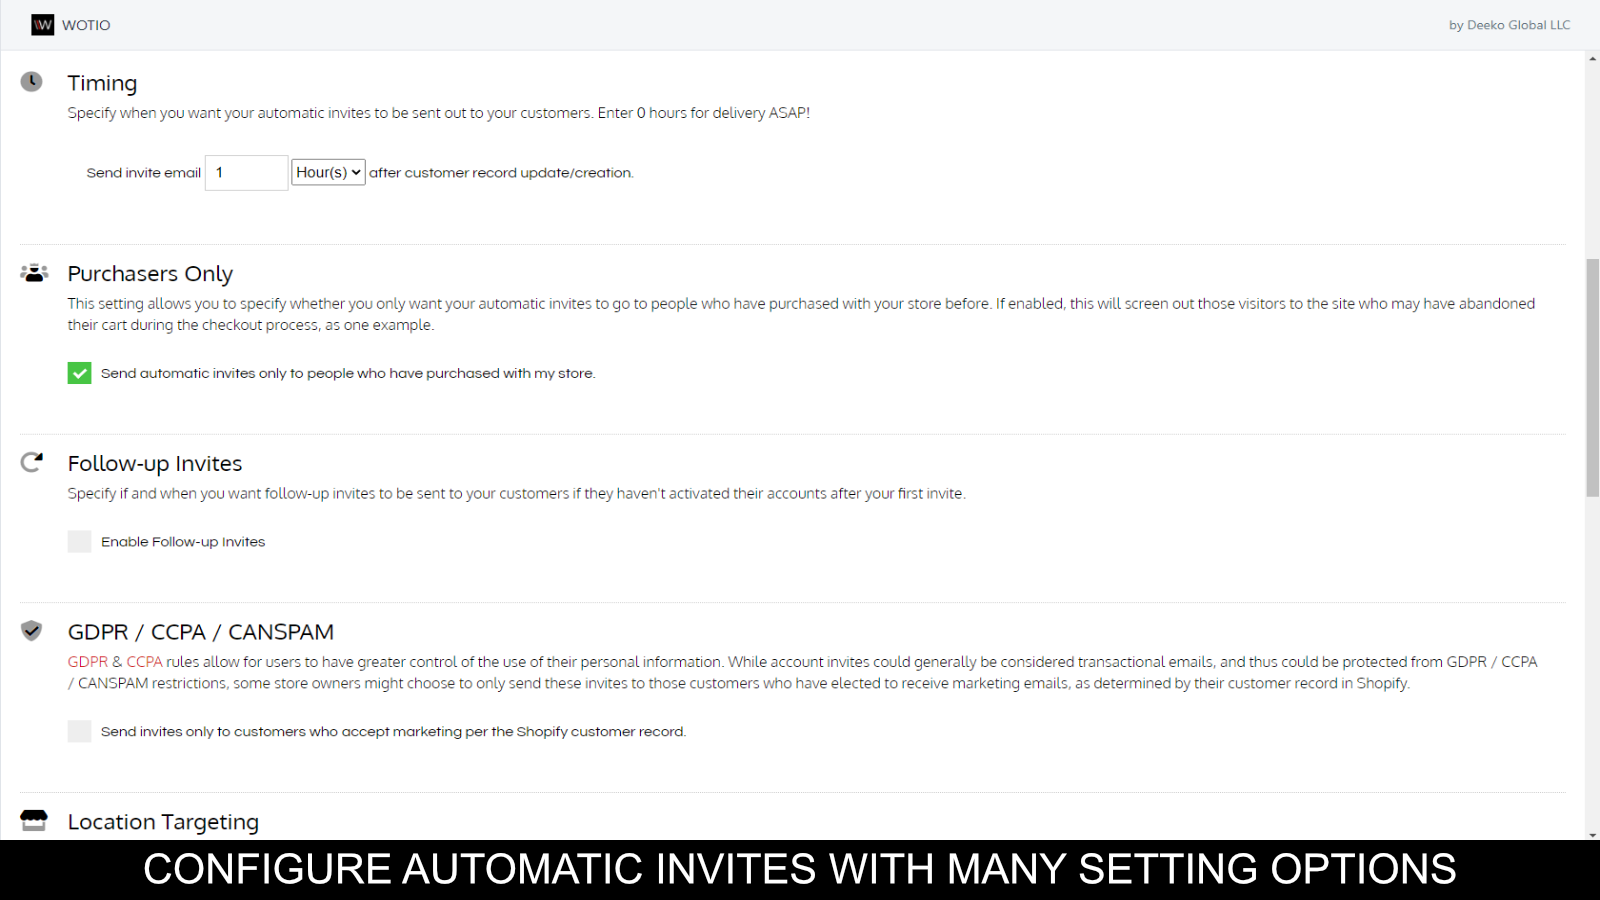 Configure automatic invites with many setting options.